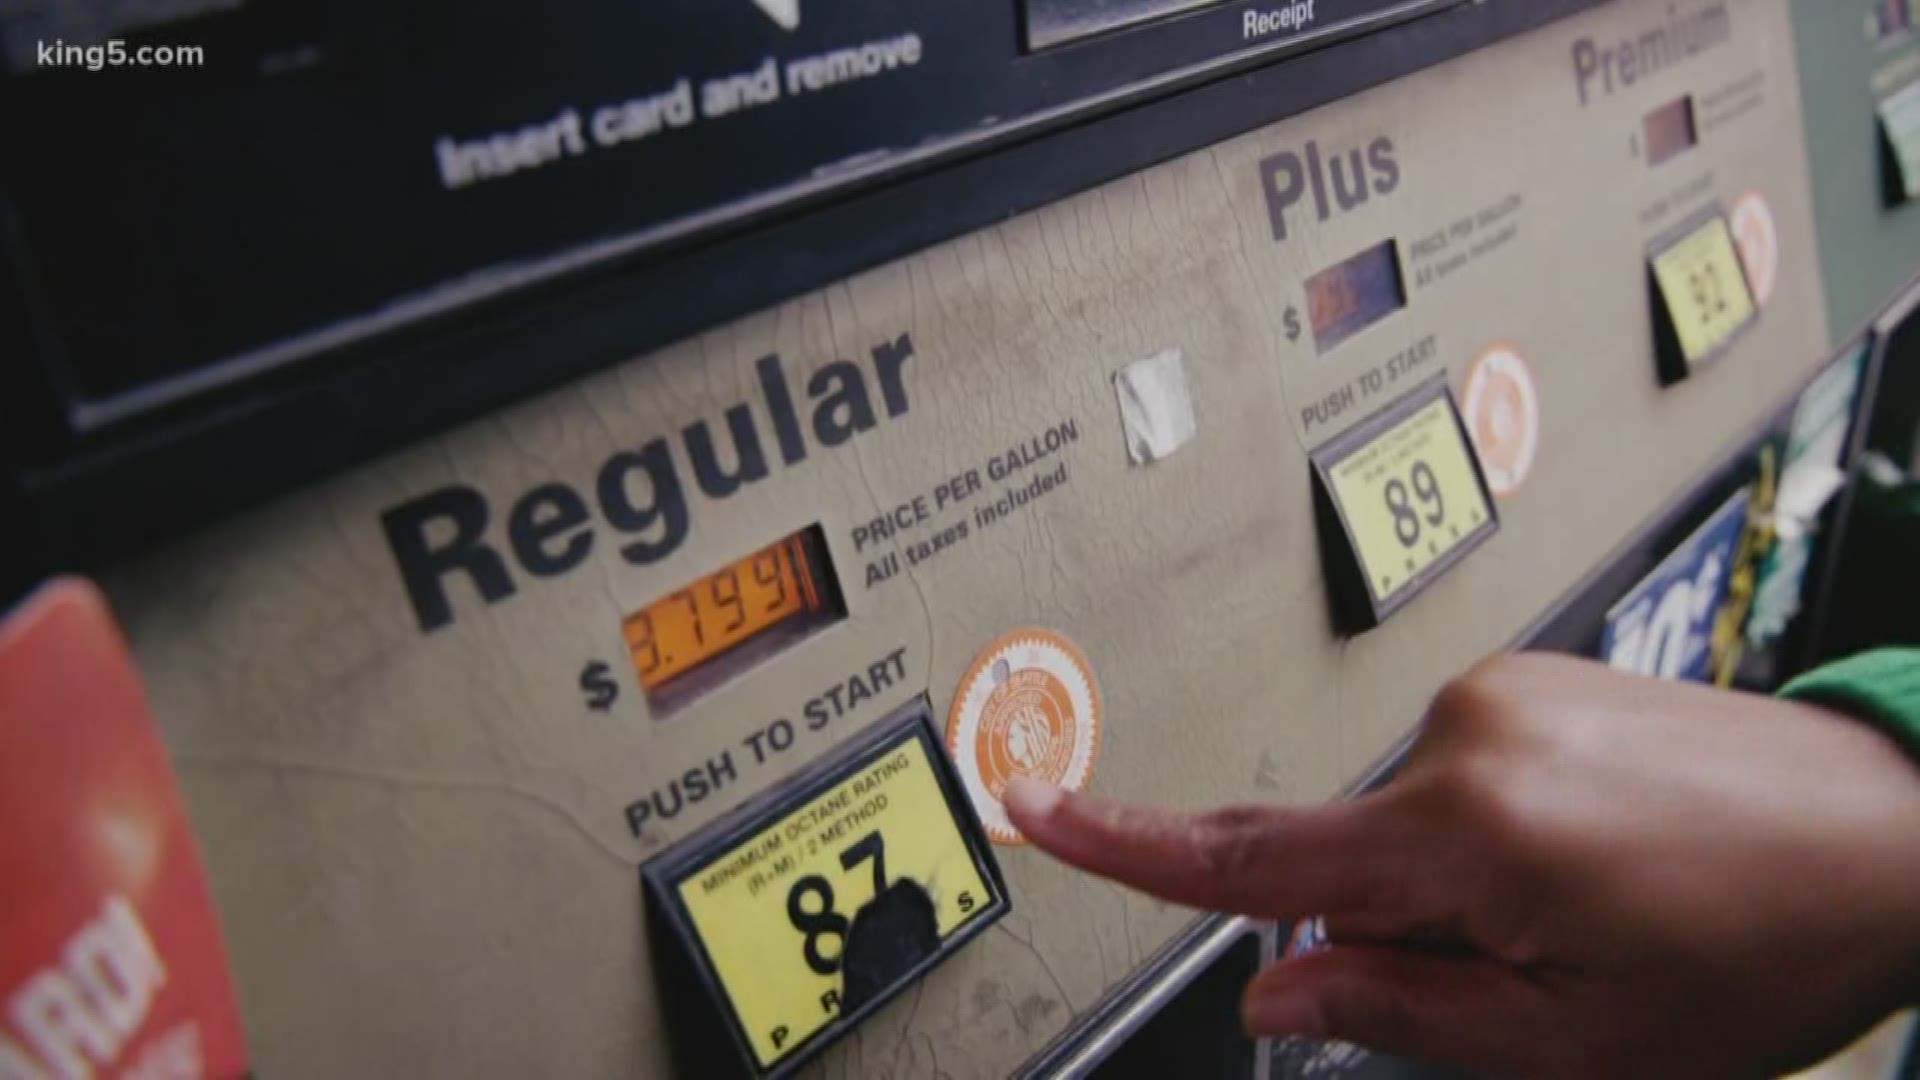 The state of Washington has the 4th highest gas tax in the country next to California, Pennsylvania, and Illinois.